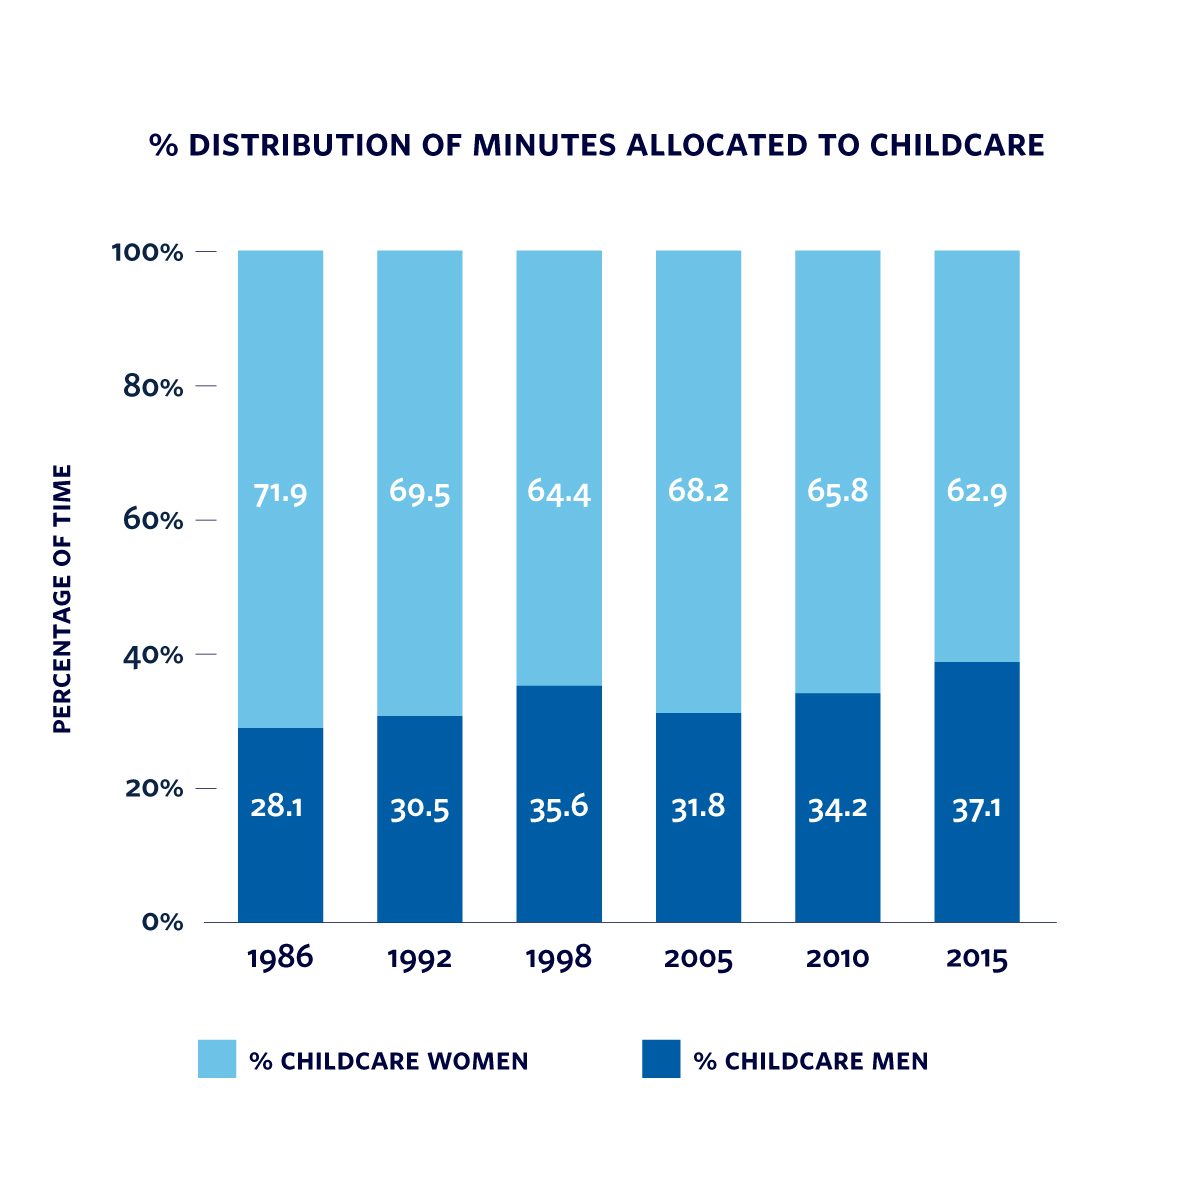 Percentage distribution of minutes allocated to childcare